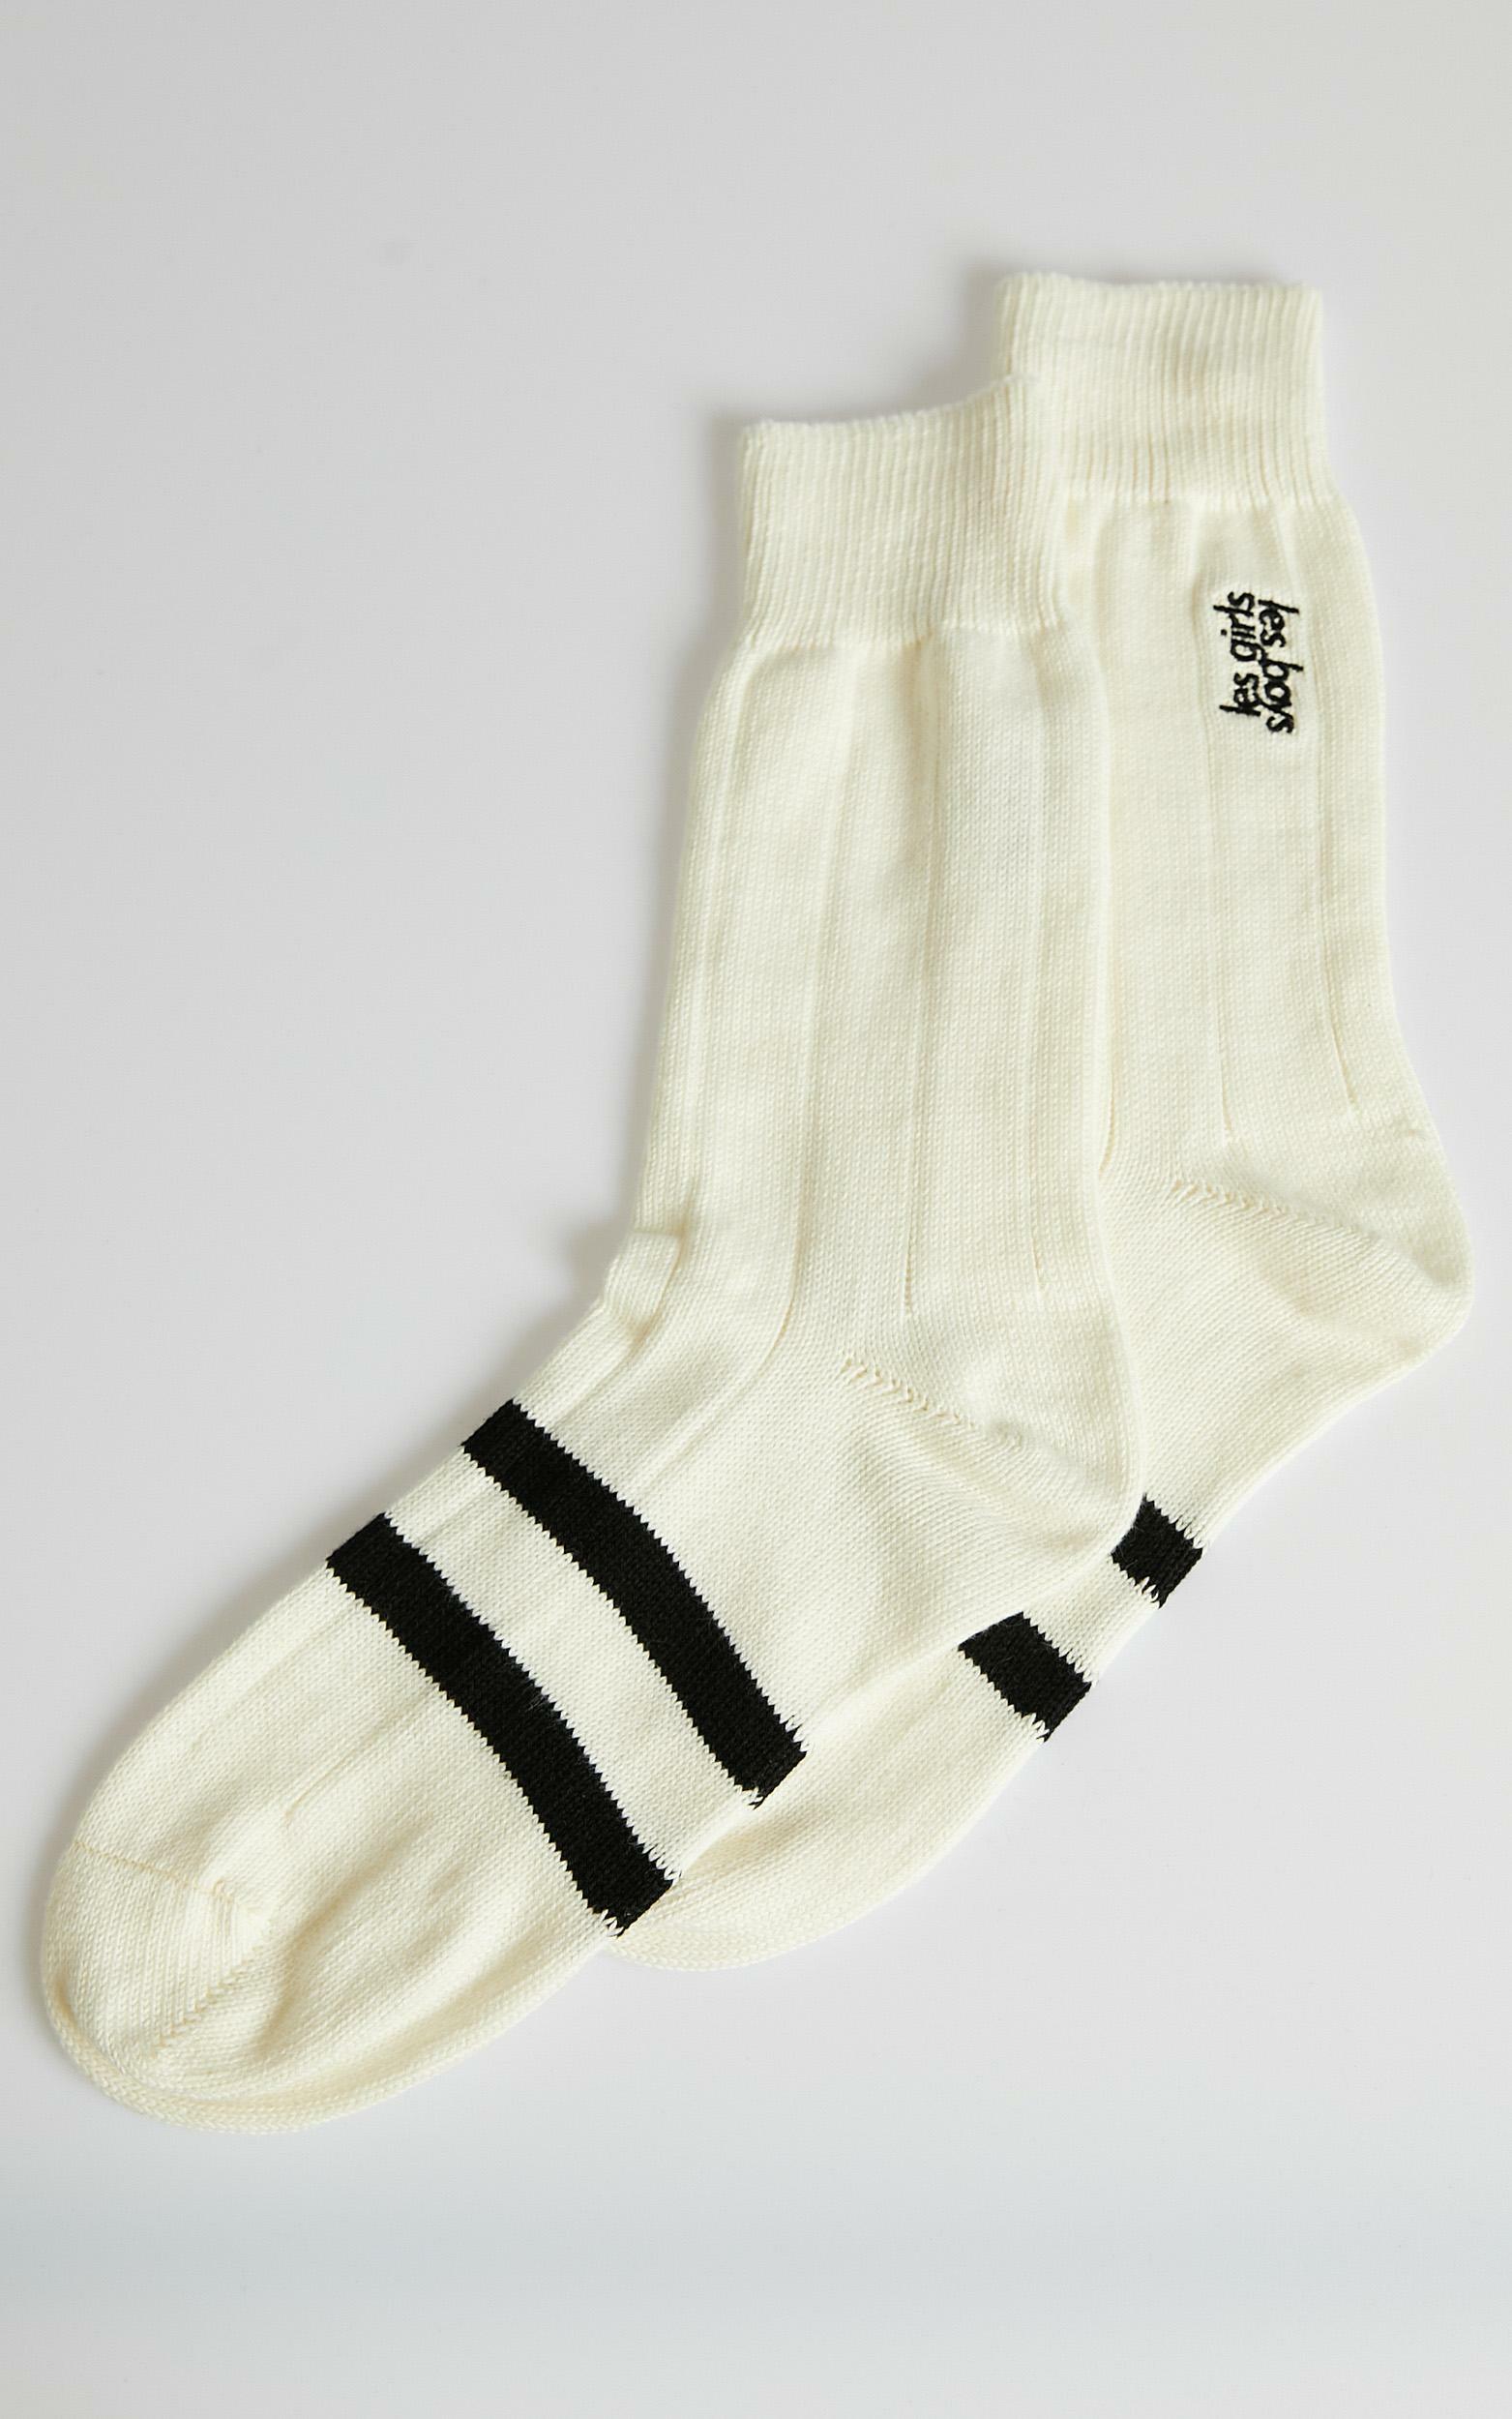 Les Girls Les Boys - Mid Calf Sock in Off White - S, WHT1, hi-res image number null